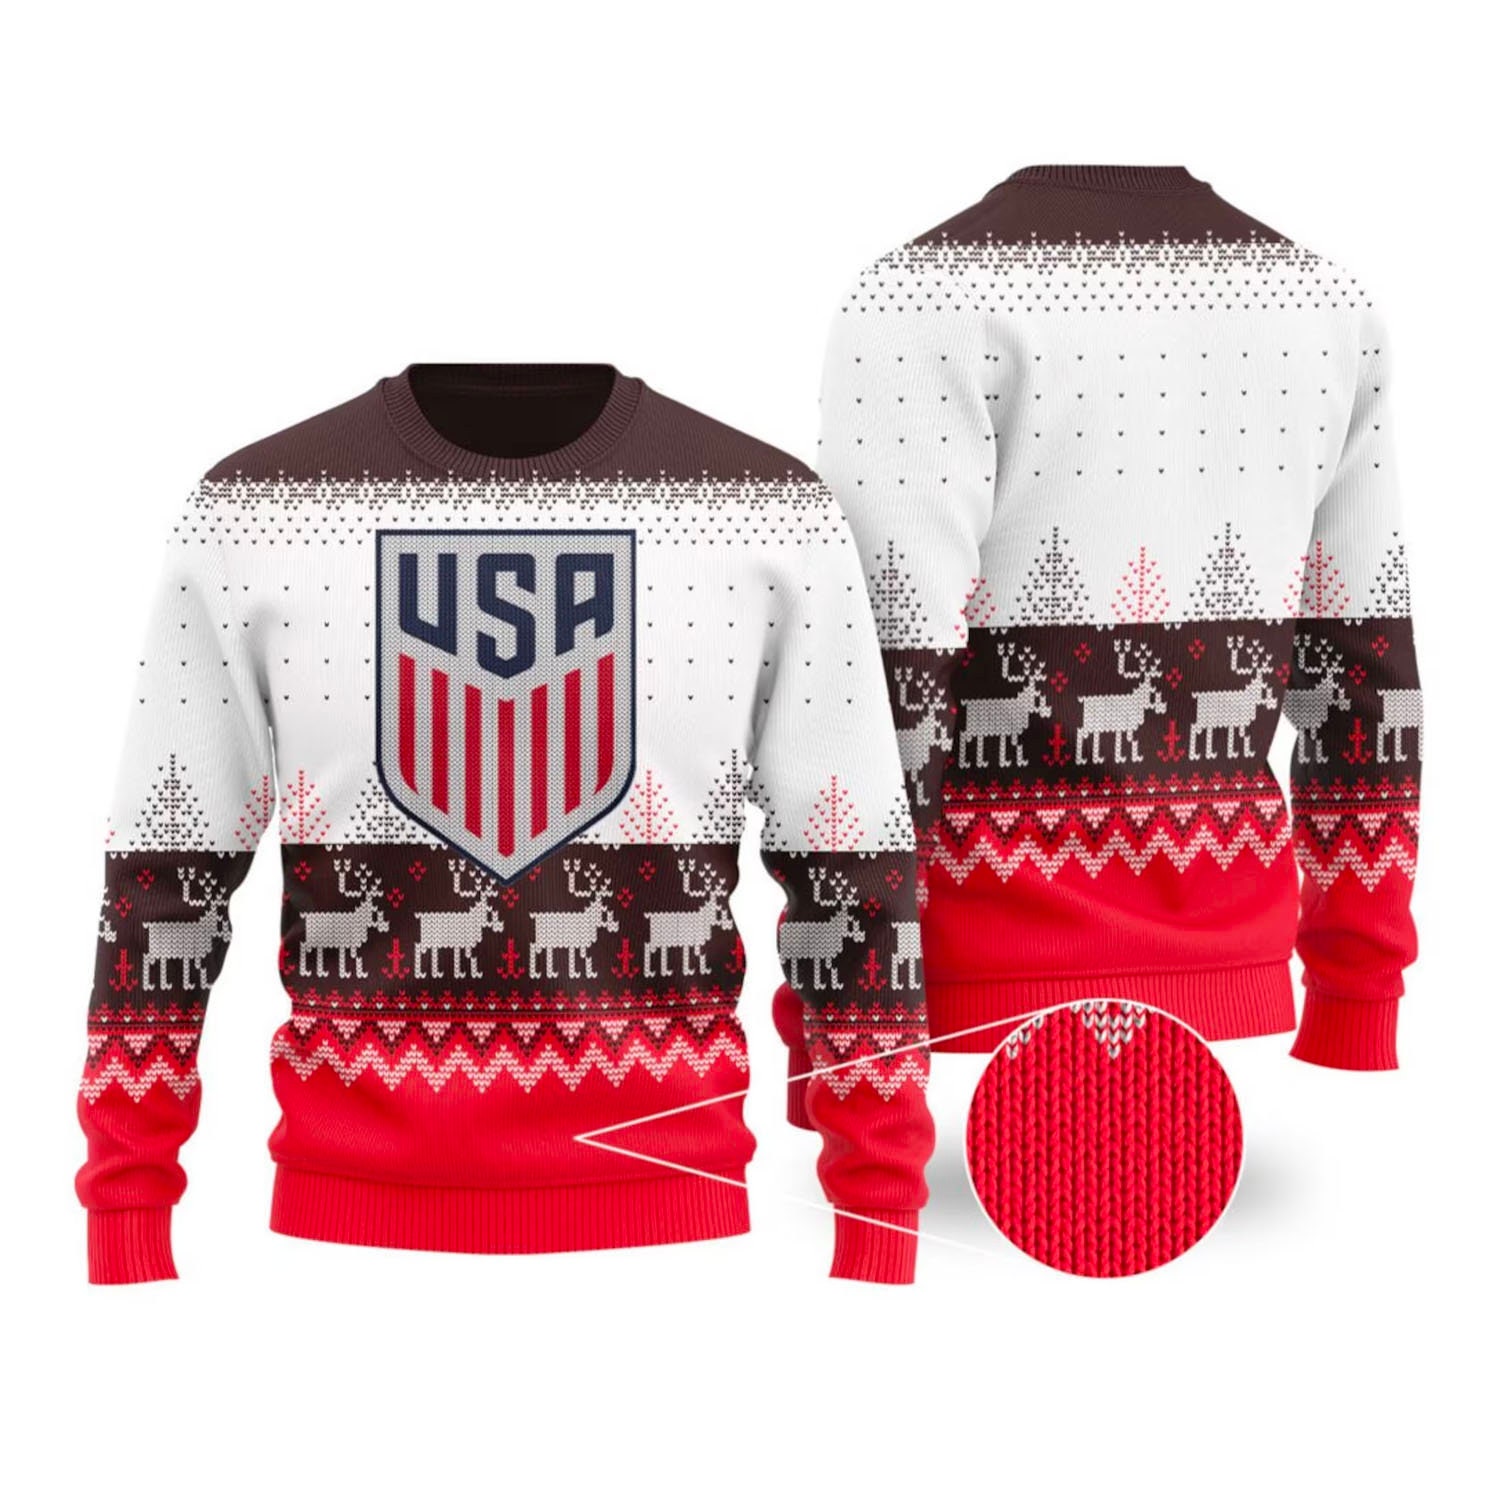 New 2022 FOX Soccer World Cup Ugly Sweater, US Men's National Soccer Team Christmas Sweaters 3D